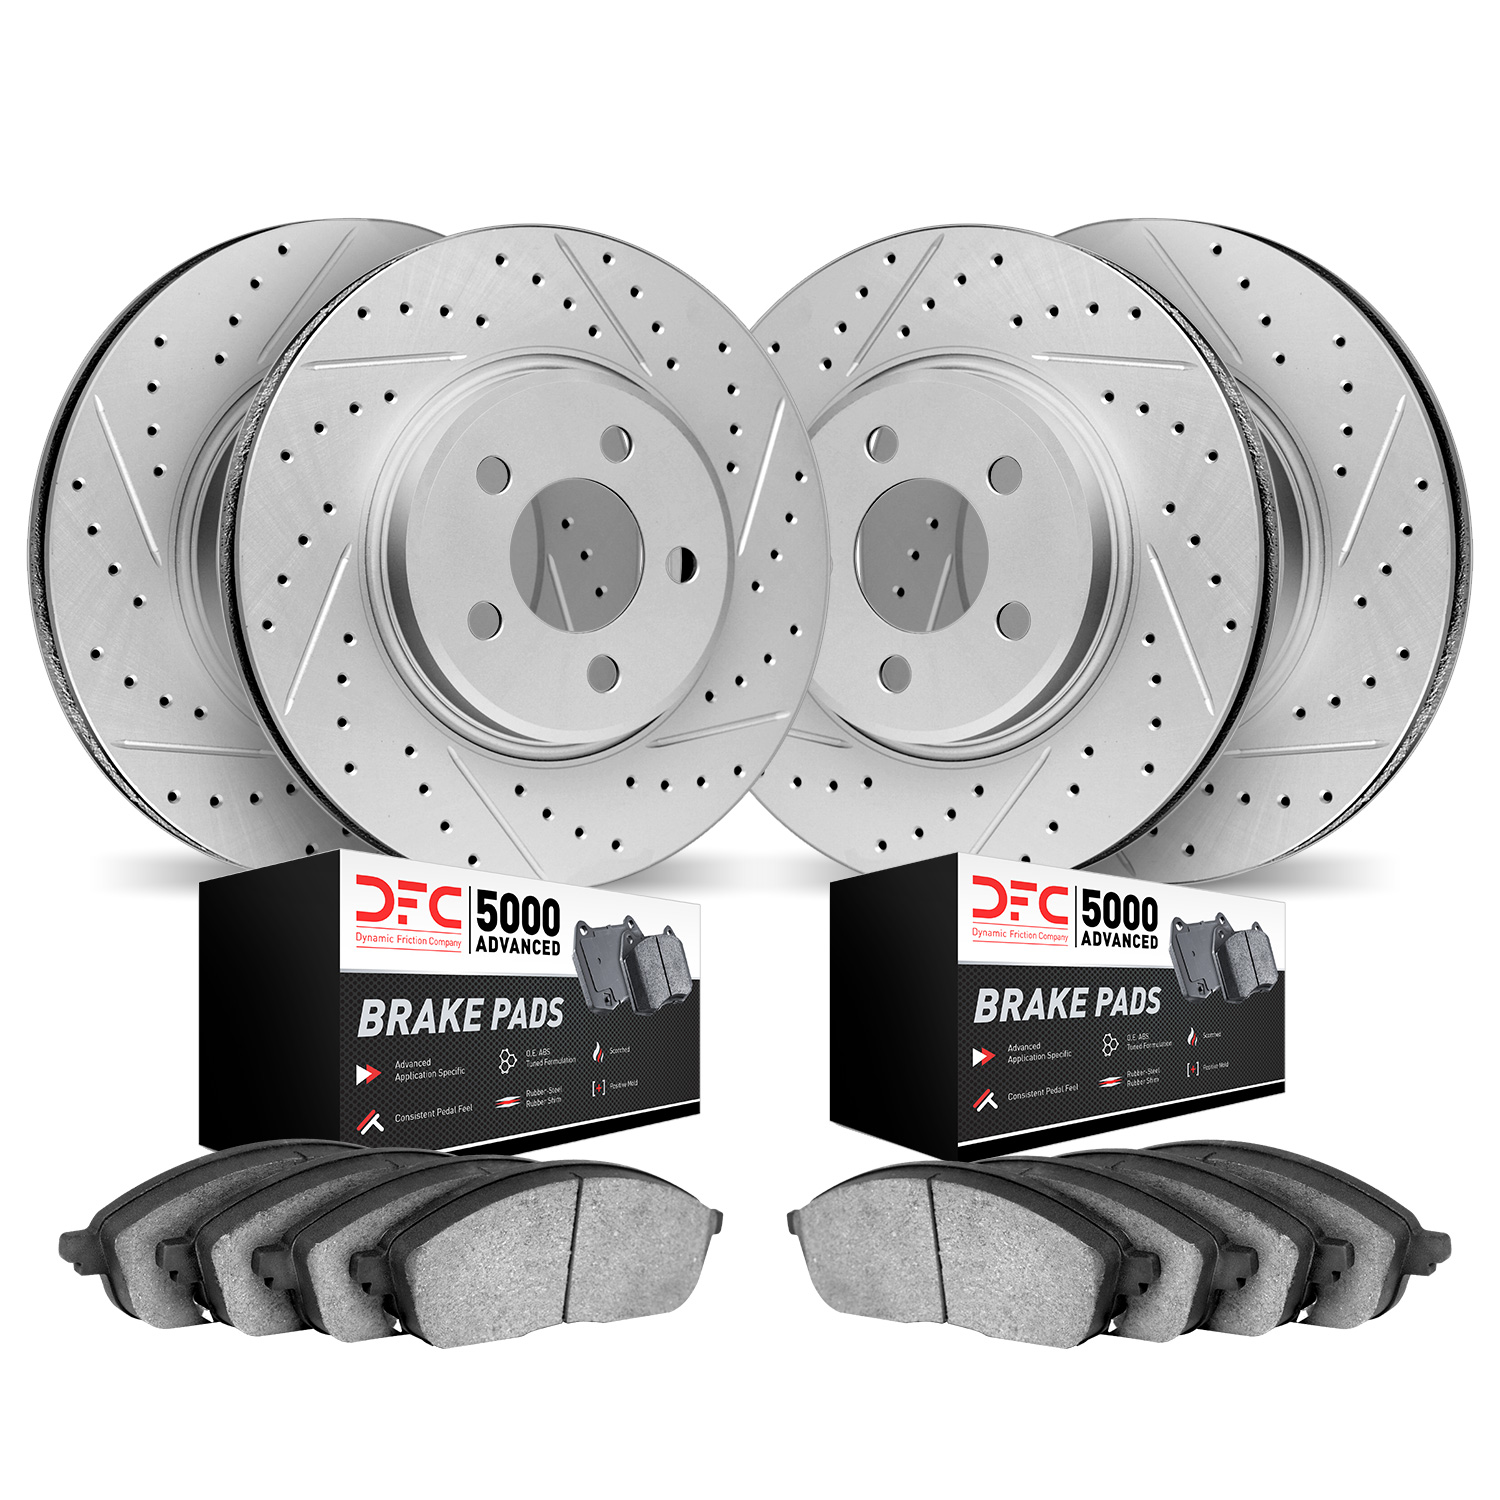 2504-47258 Geoperformance Drilled/Slotted Rotors w/5000 Advanced Brake Pads Kit, 1968-1969 GM, Position: Front and Rear